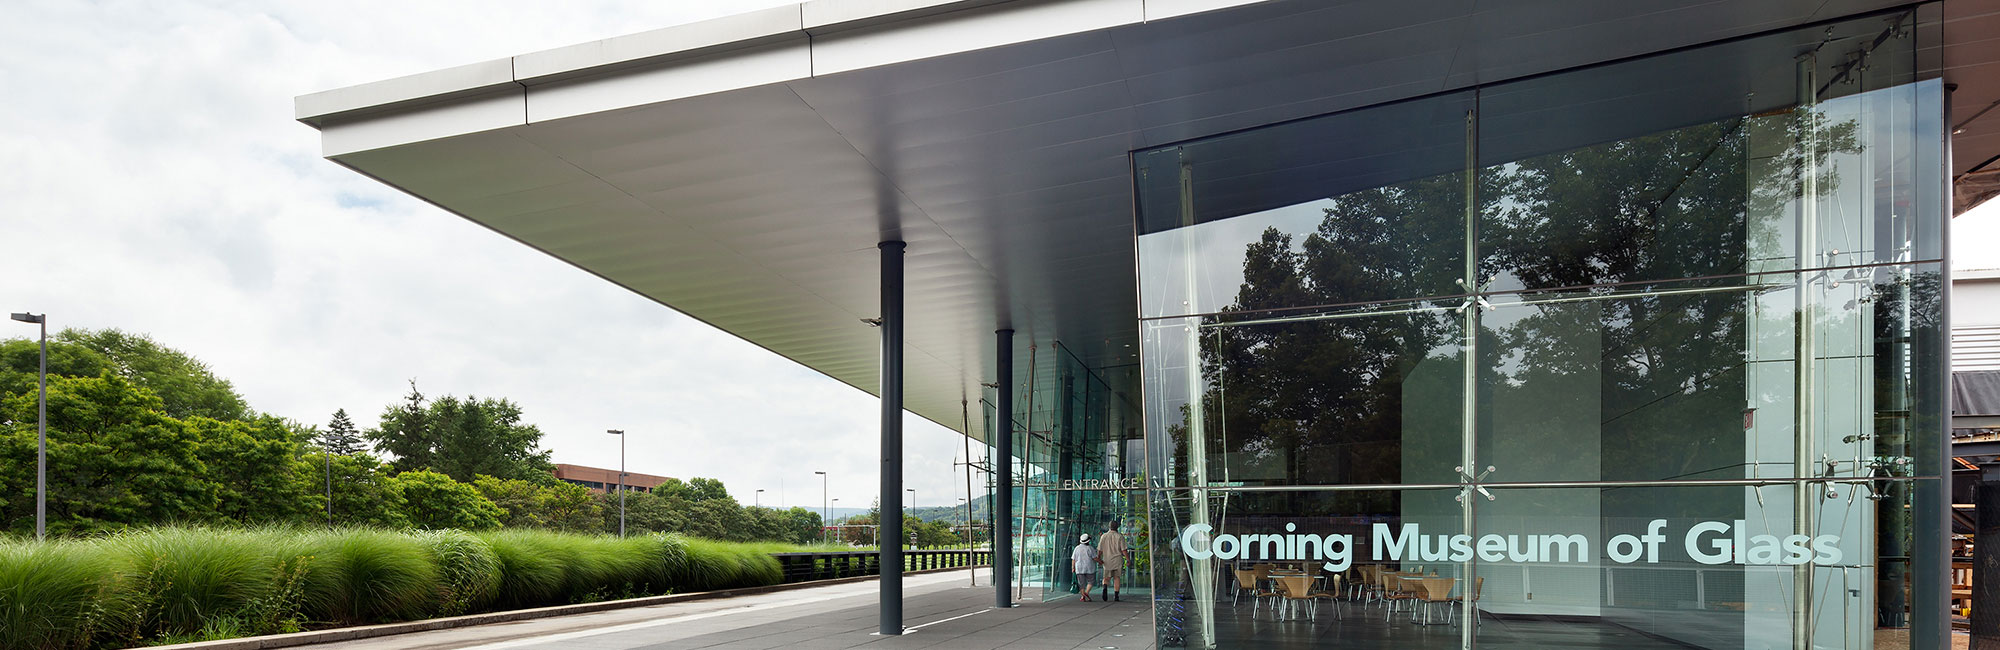 The Corning Museum of Glass entrance